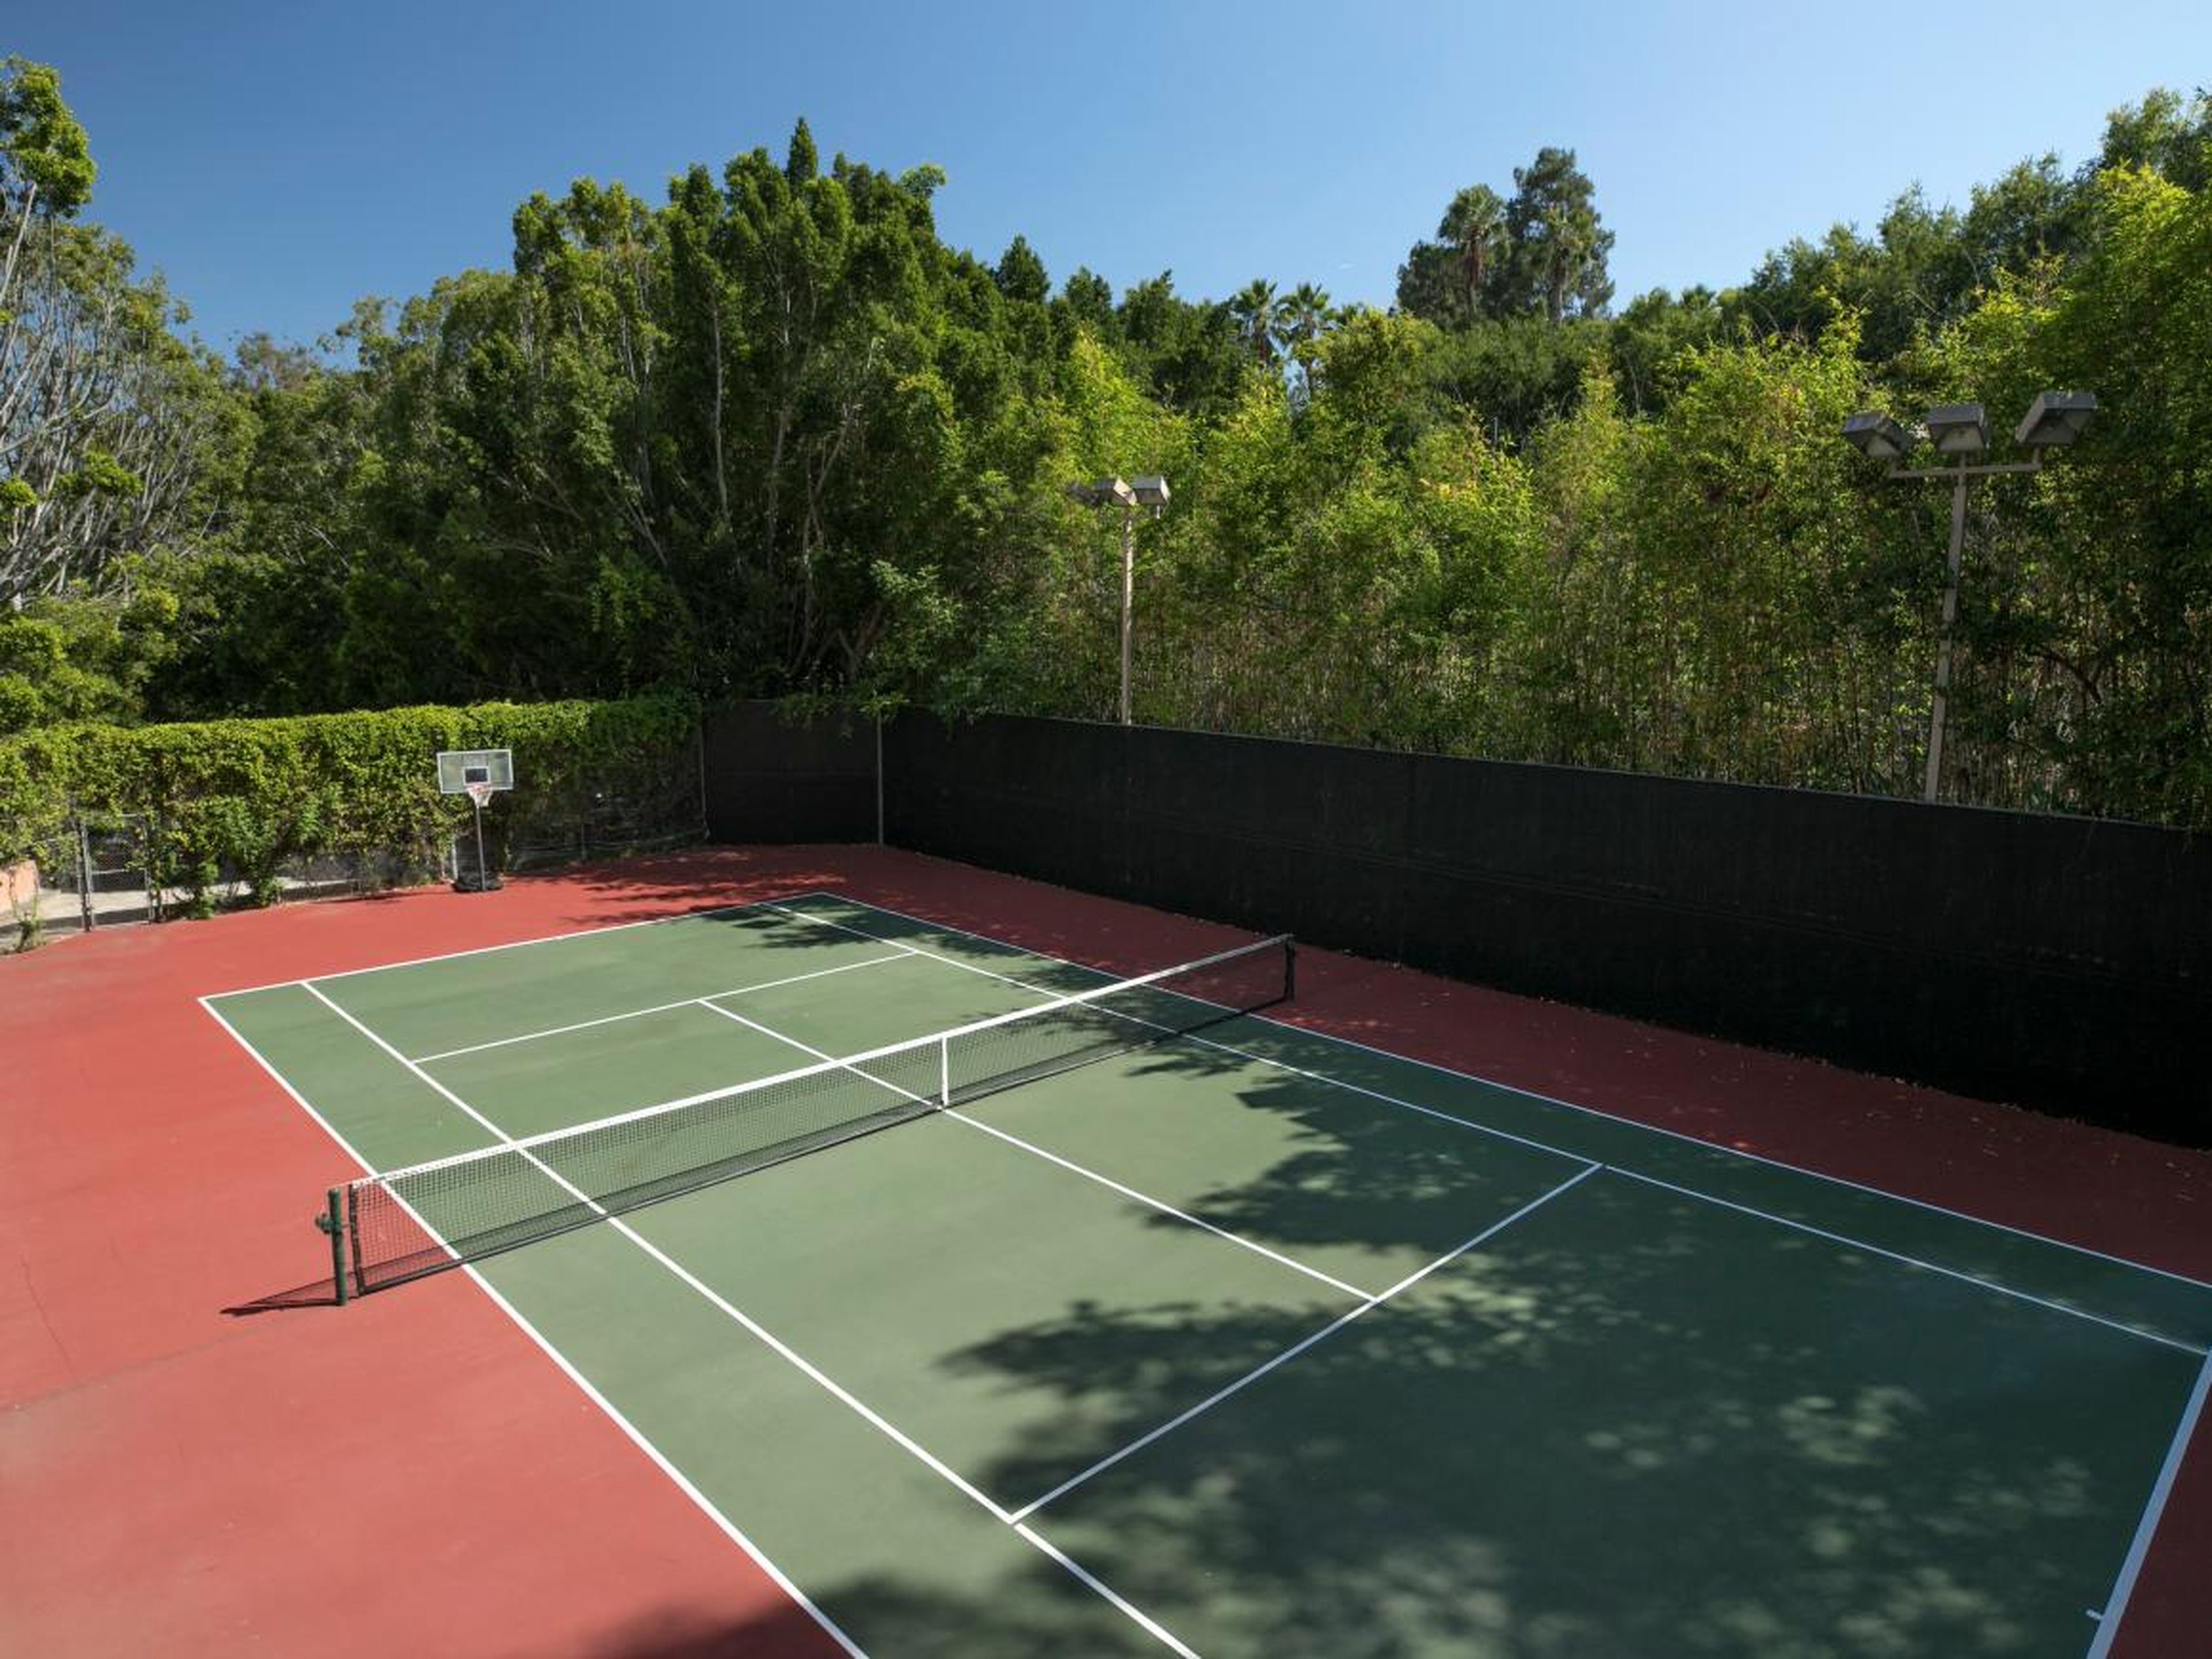 And what would a multimillion-dollar estate be without its own private tennis court?